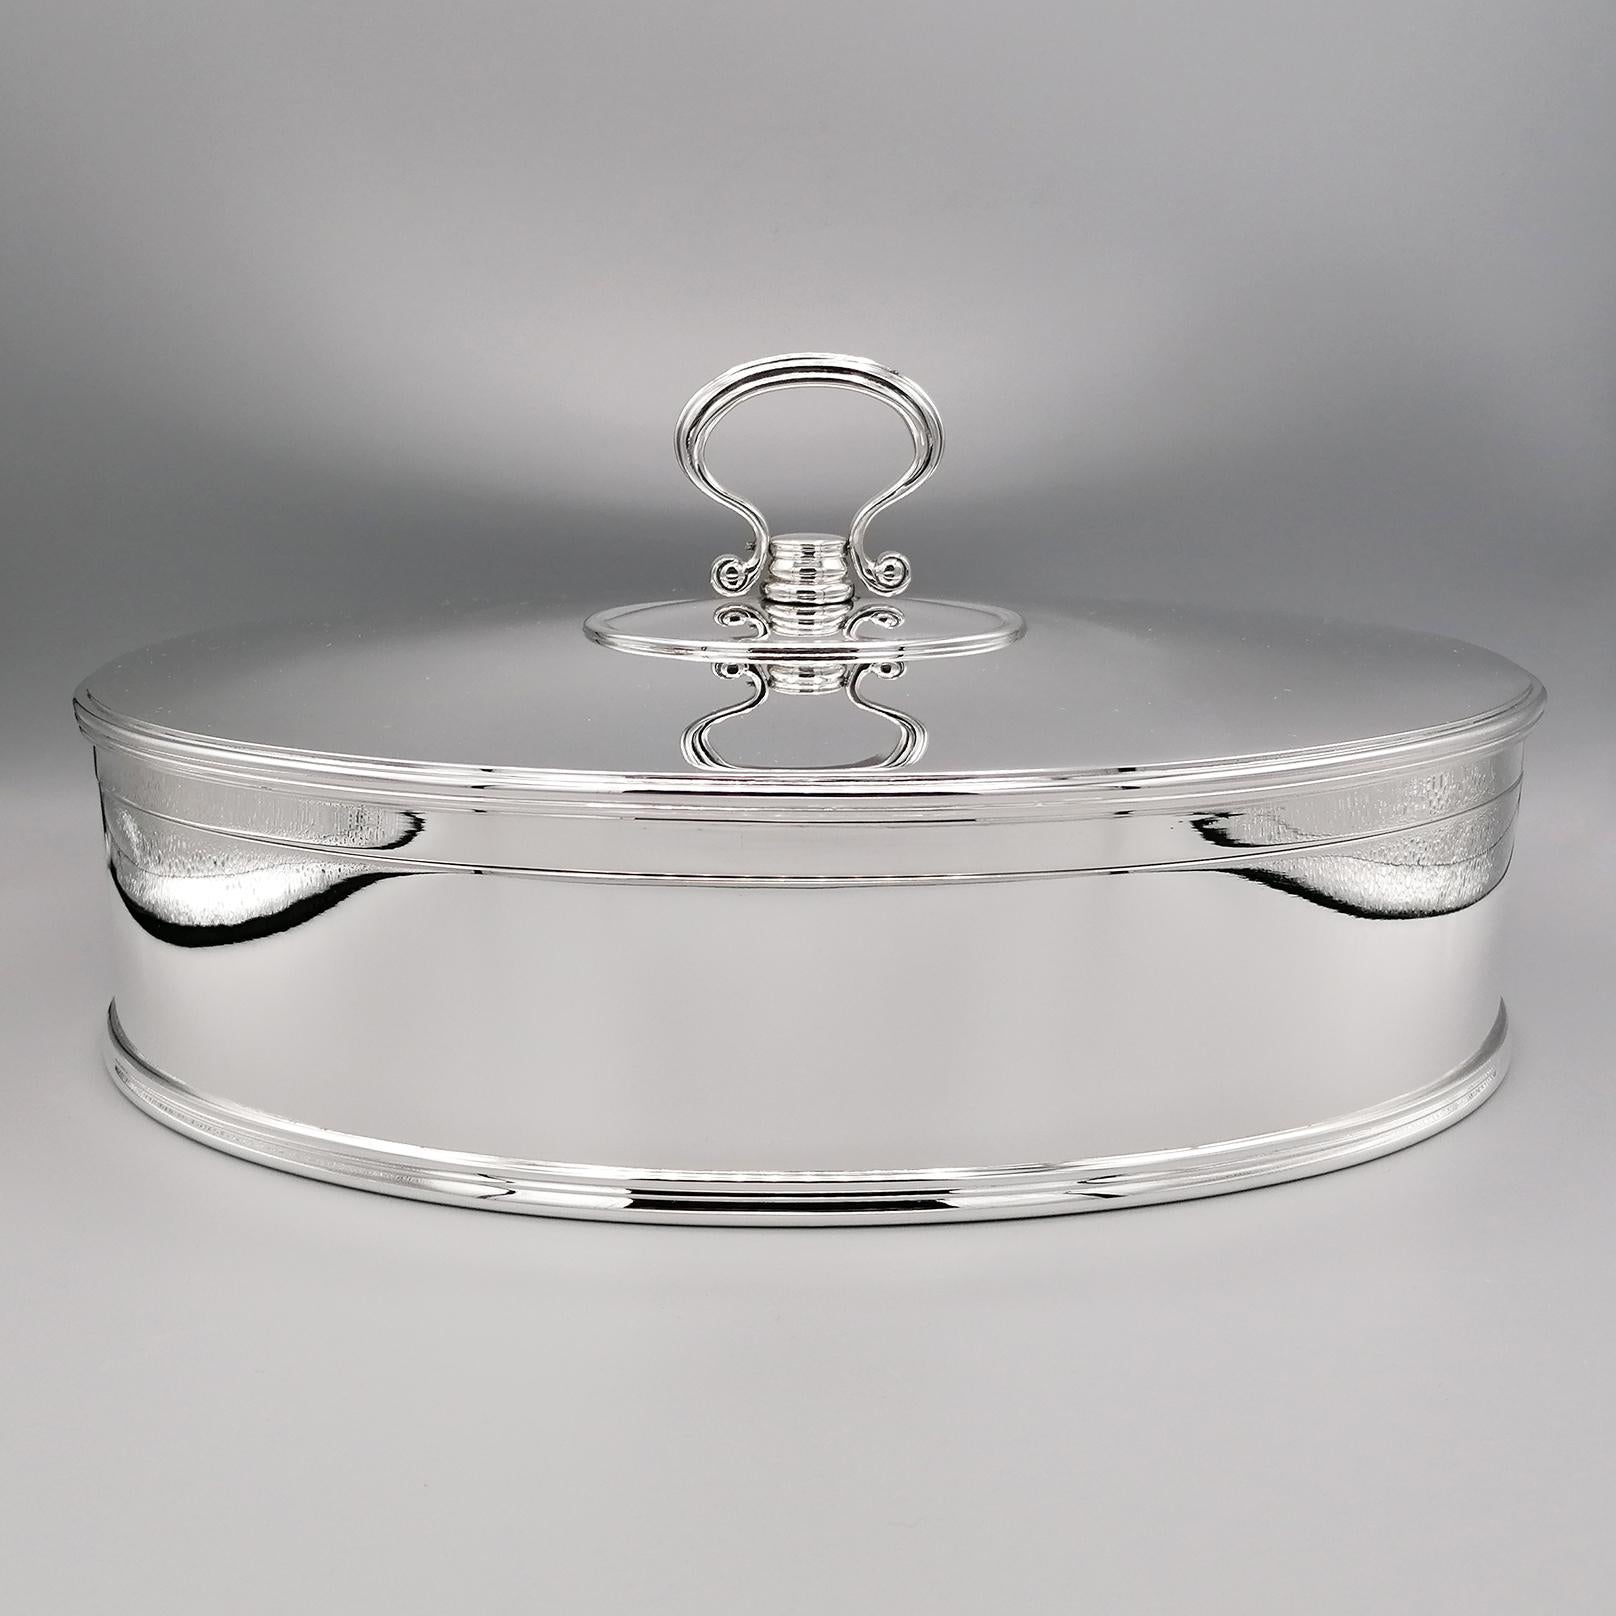 Impressive oval-shaped sterling silver box.
The shape is simple and smooth adaptable to all furnishings.
At the center of the lid there is a swinging handle also in solid silver to allow it to be opened.
In the lower and upper part of the body of